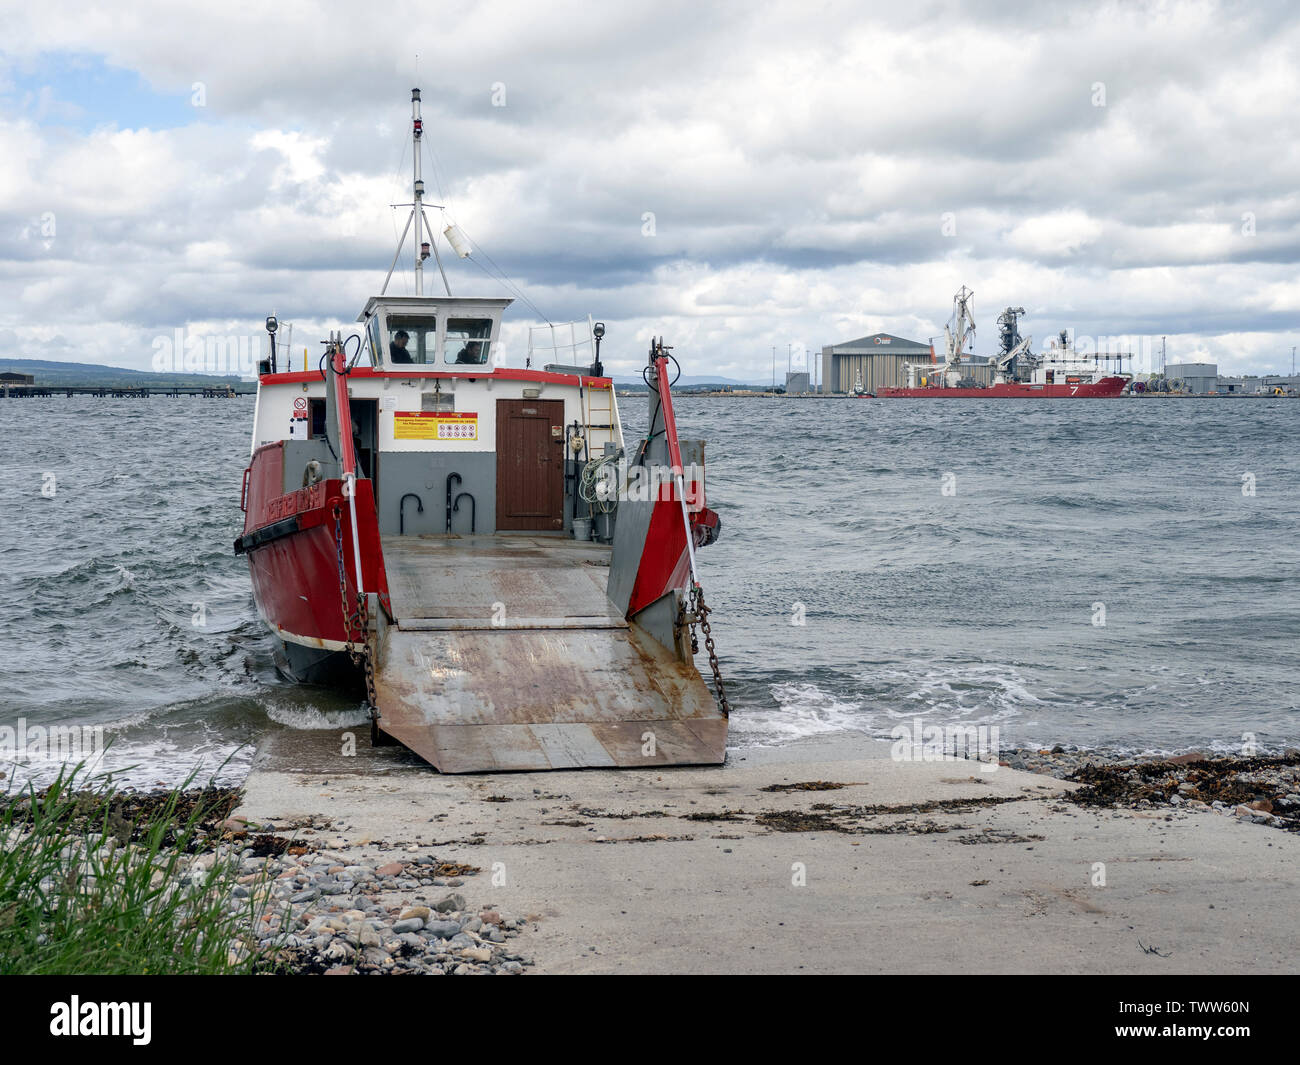 The Cromarty to Nigg ferry at Cromarty, Black Isle, Ross and Cromarty, Scotland, United Kingdom. This is one of the smallest car ferries in the UK. Stock Photo